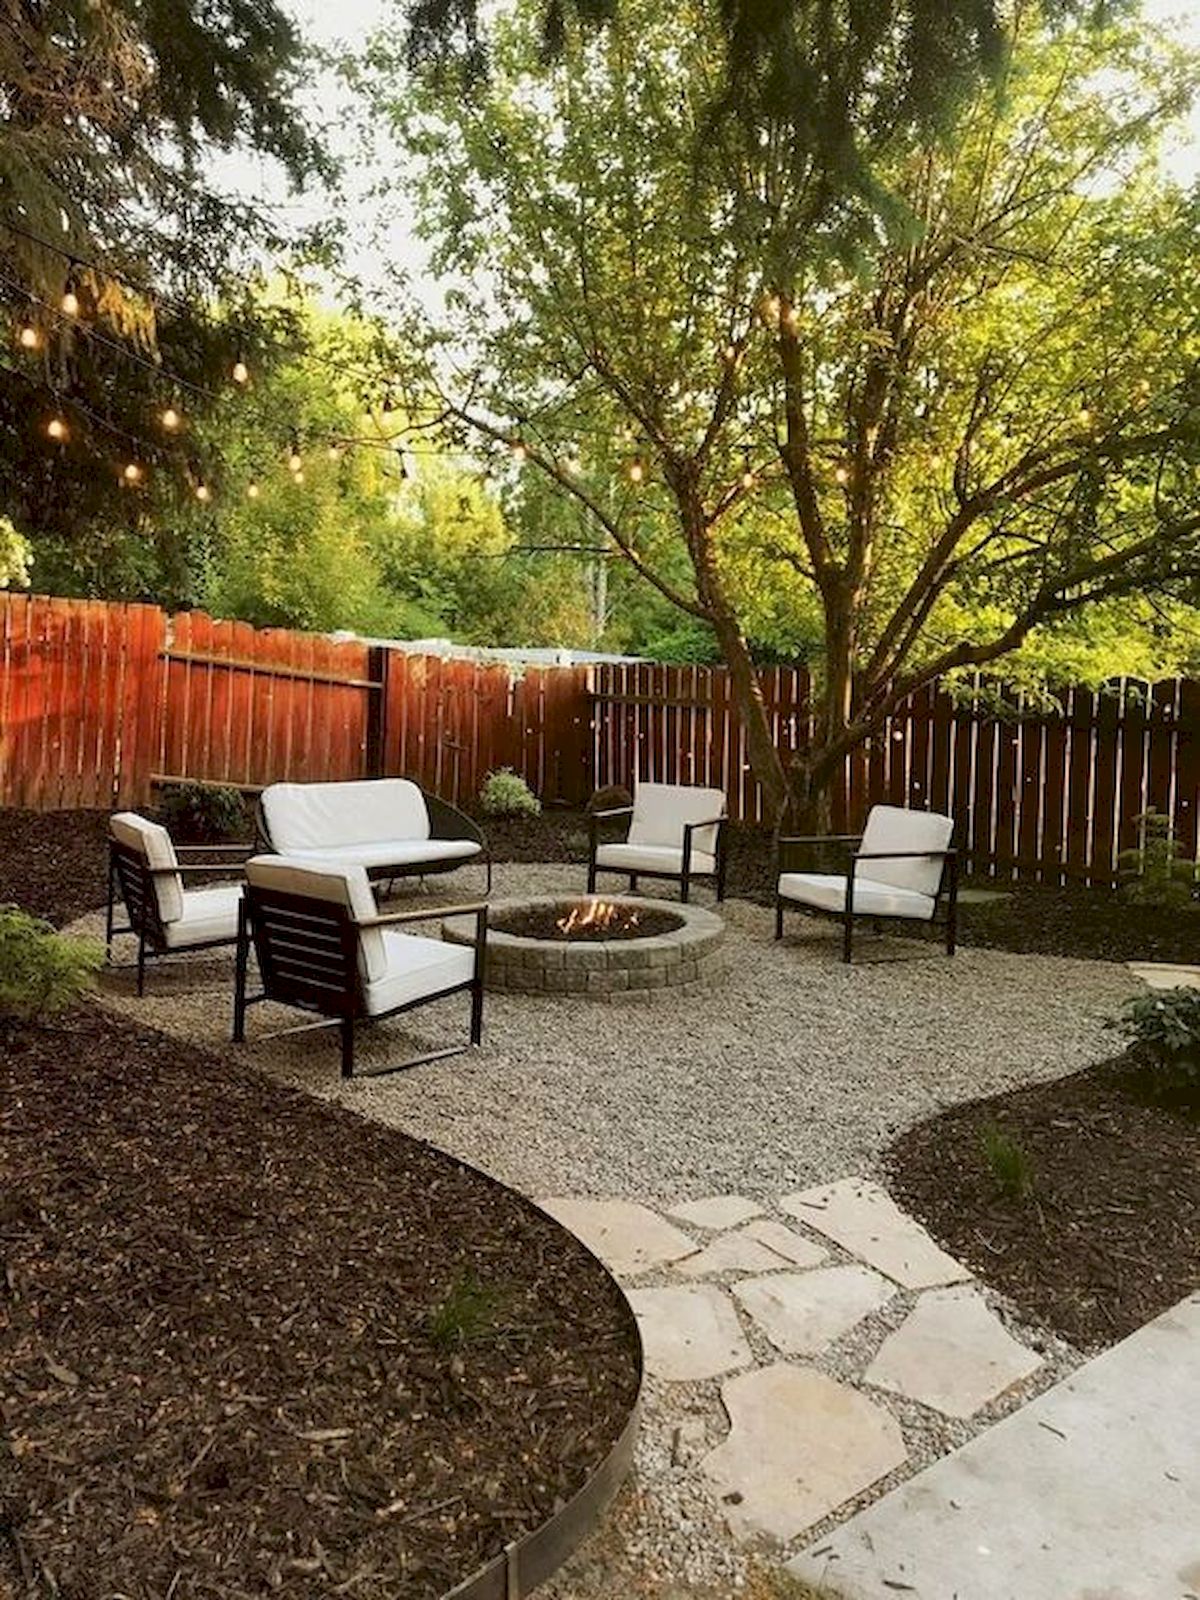 55 Awesome Backyard Fire Pit Ideas For Comfortable Relax (3)